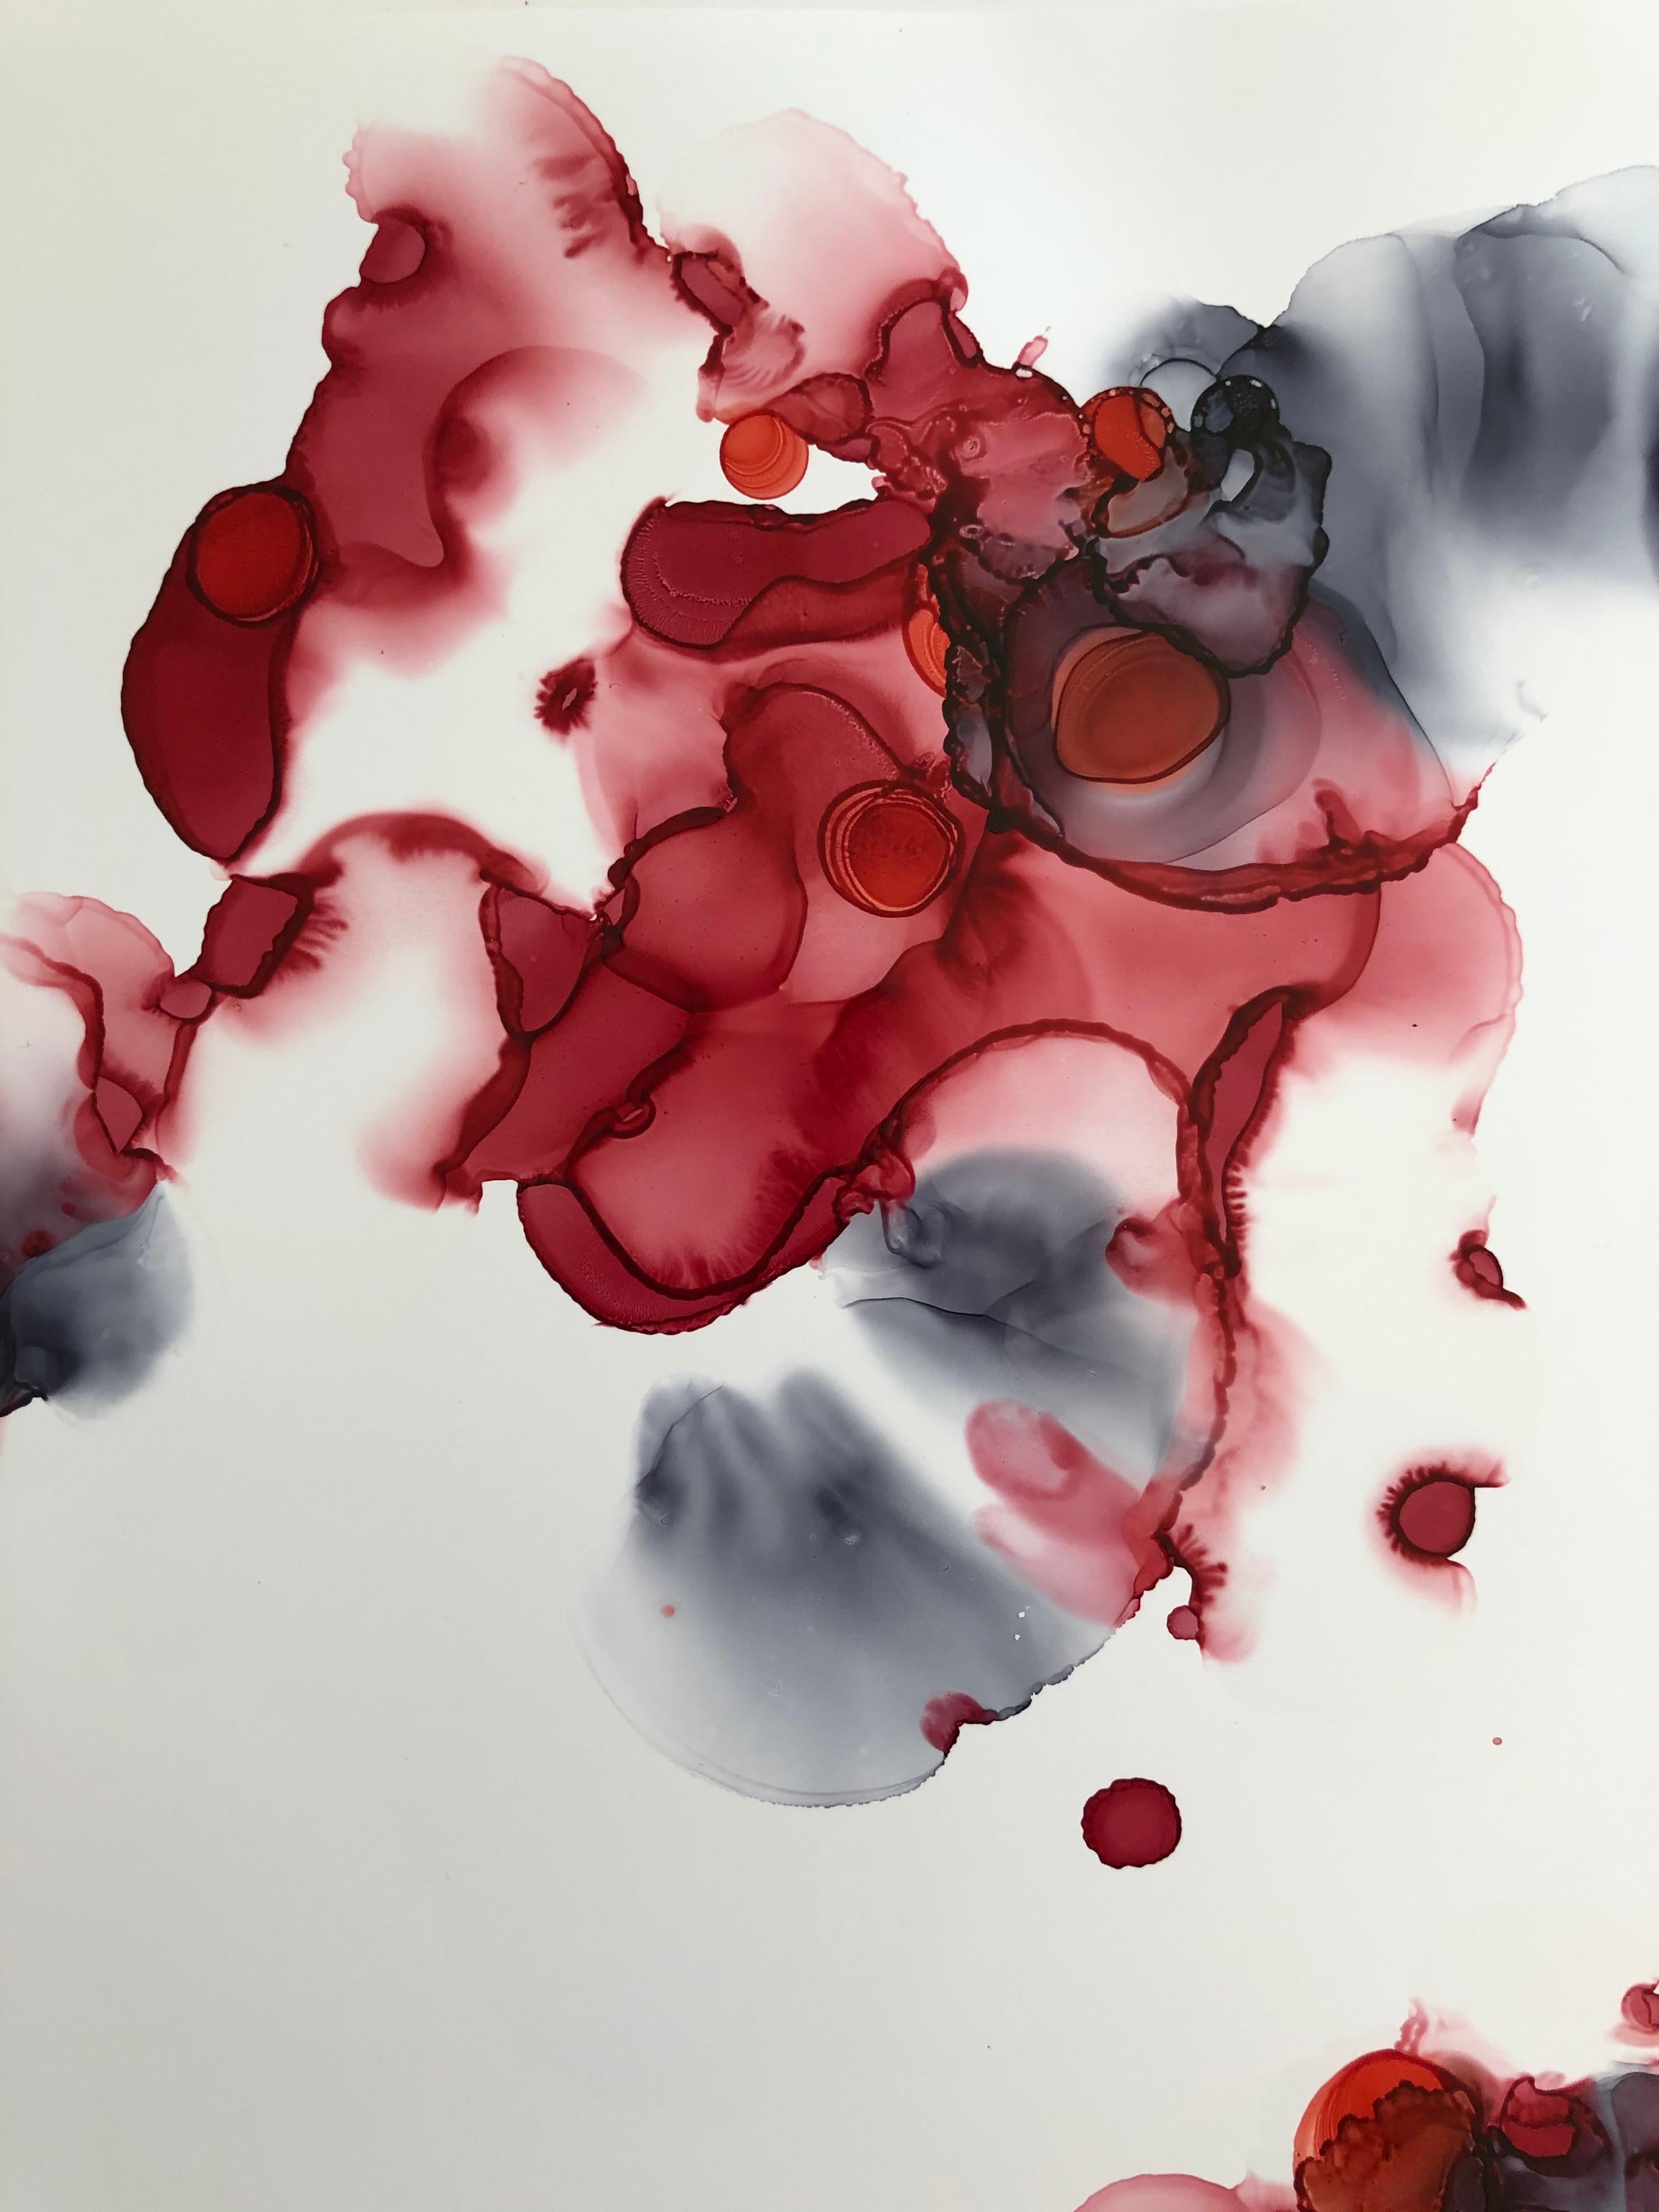 Singed roses - abstraction art, made in cherry red, garnet red, white, grey - Black Abstract Drawing by Mila Akopova